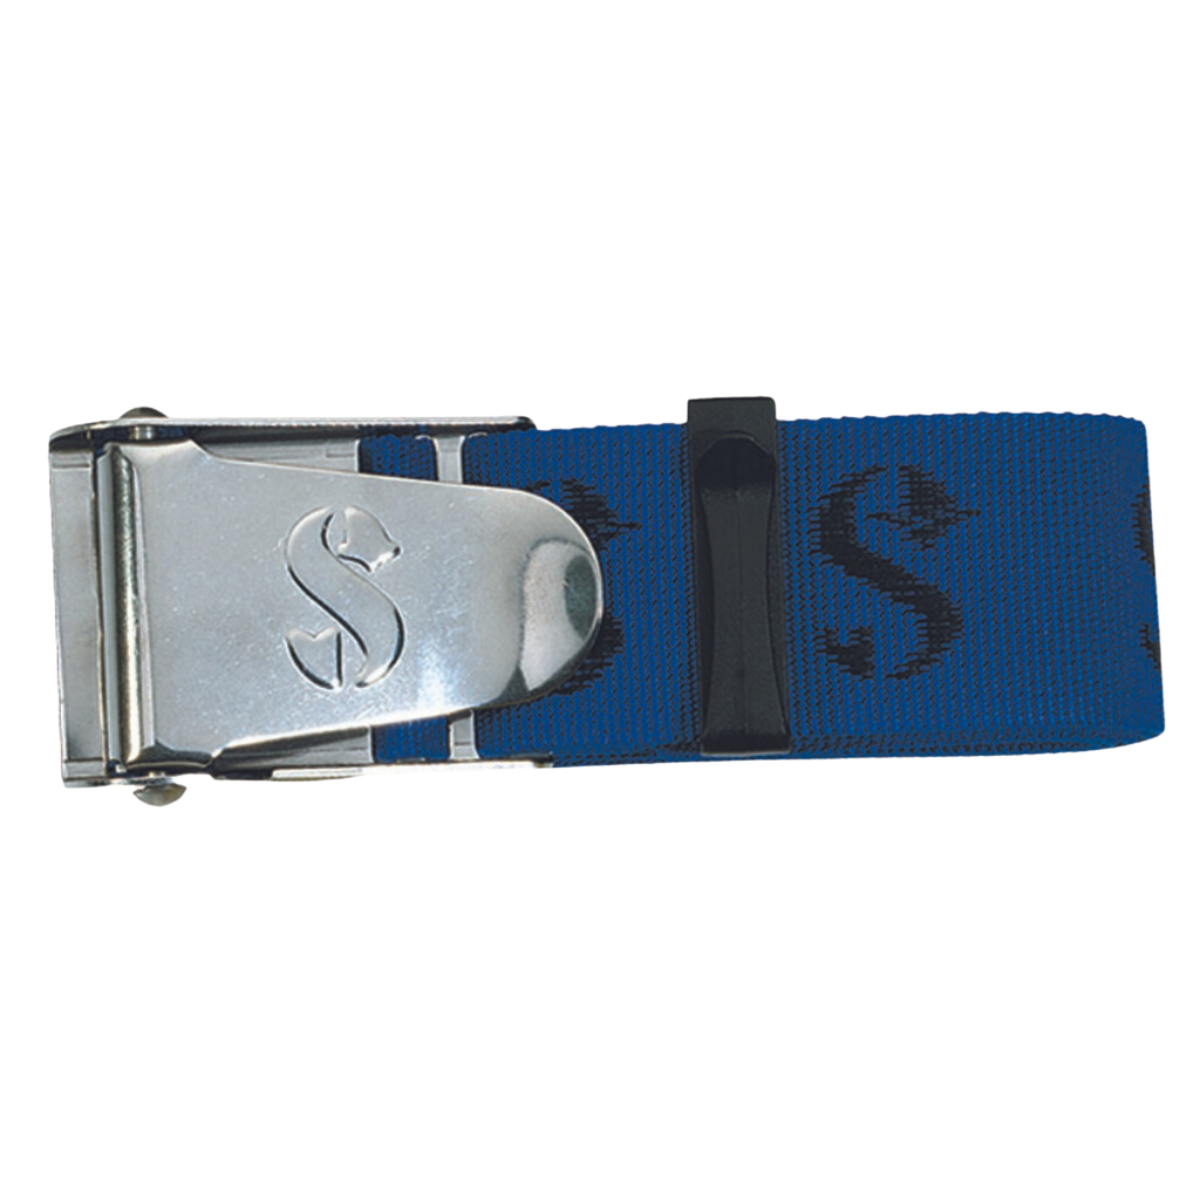 Scubapro Weight Belt With Inox Buckle